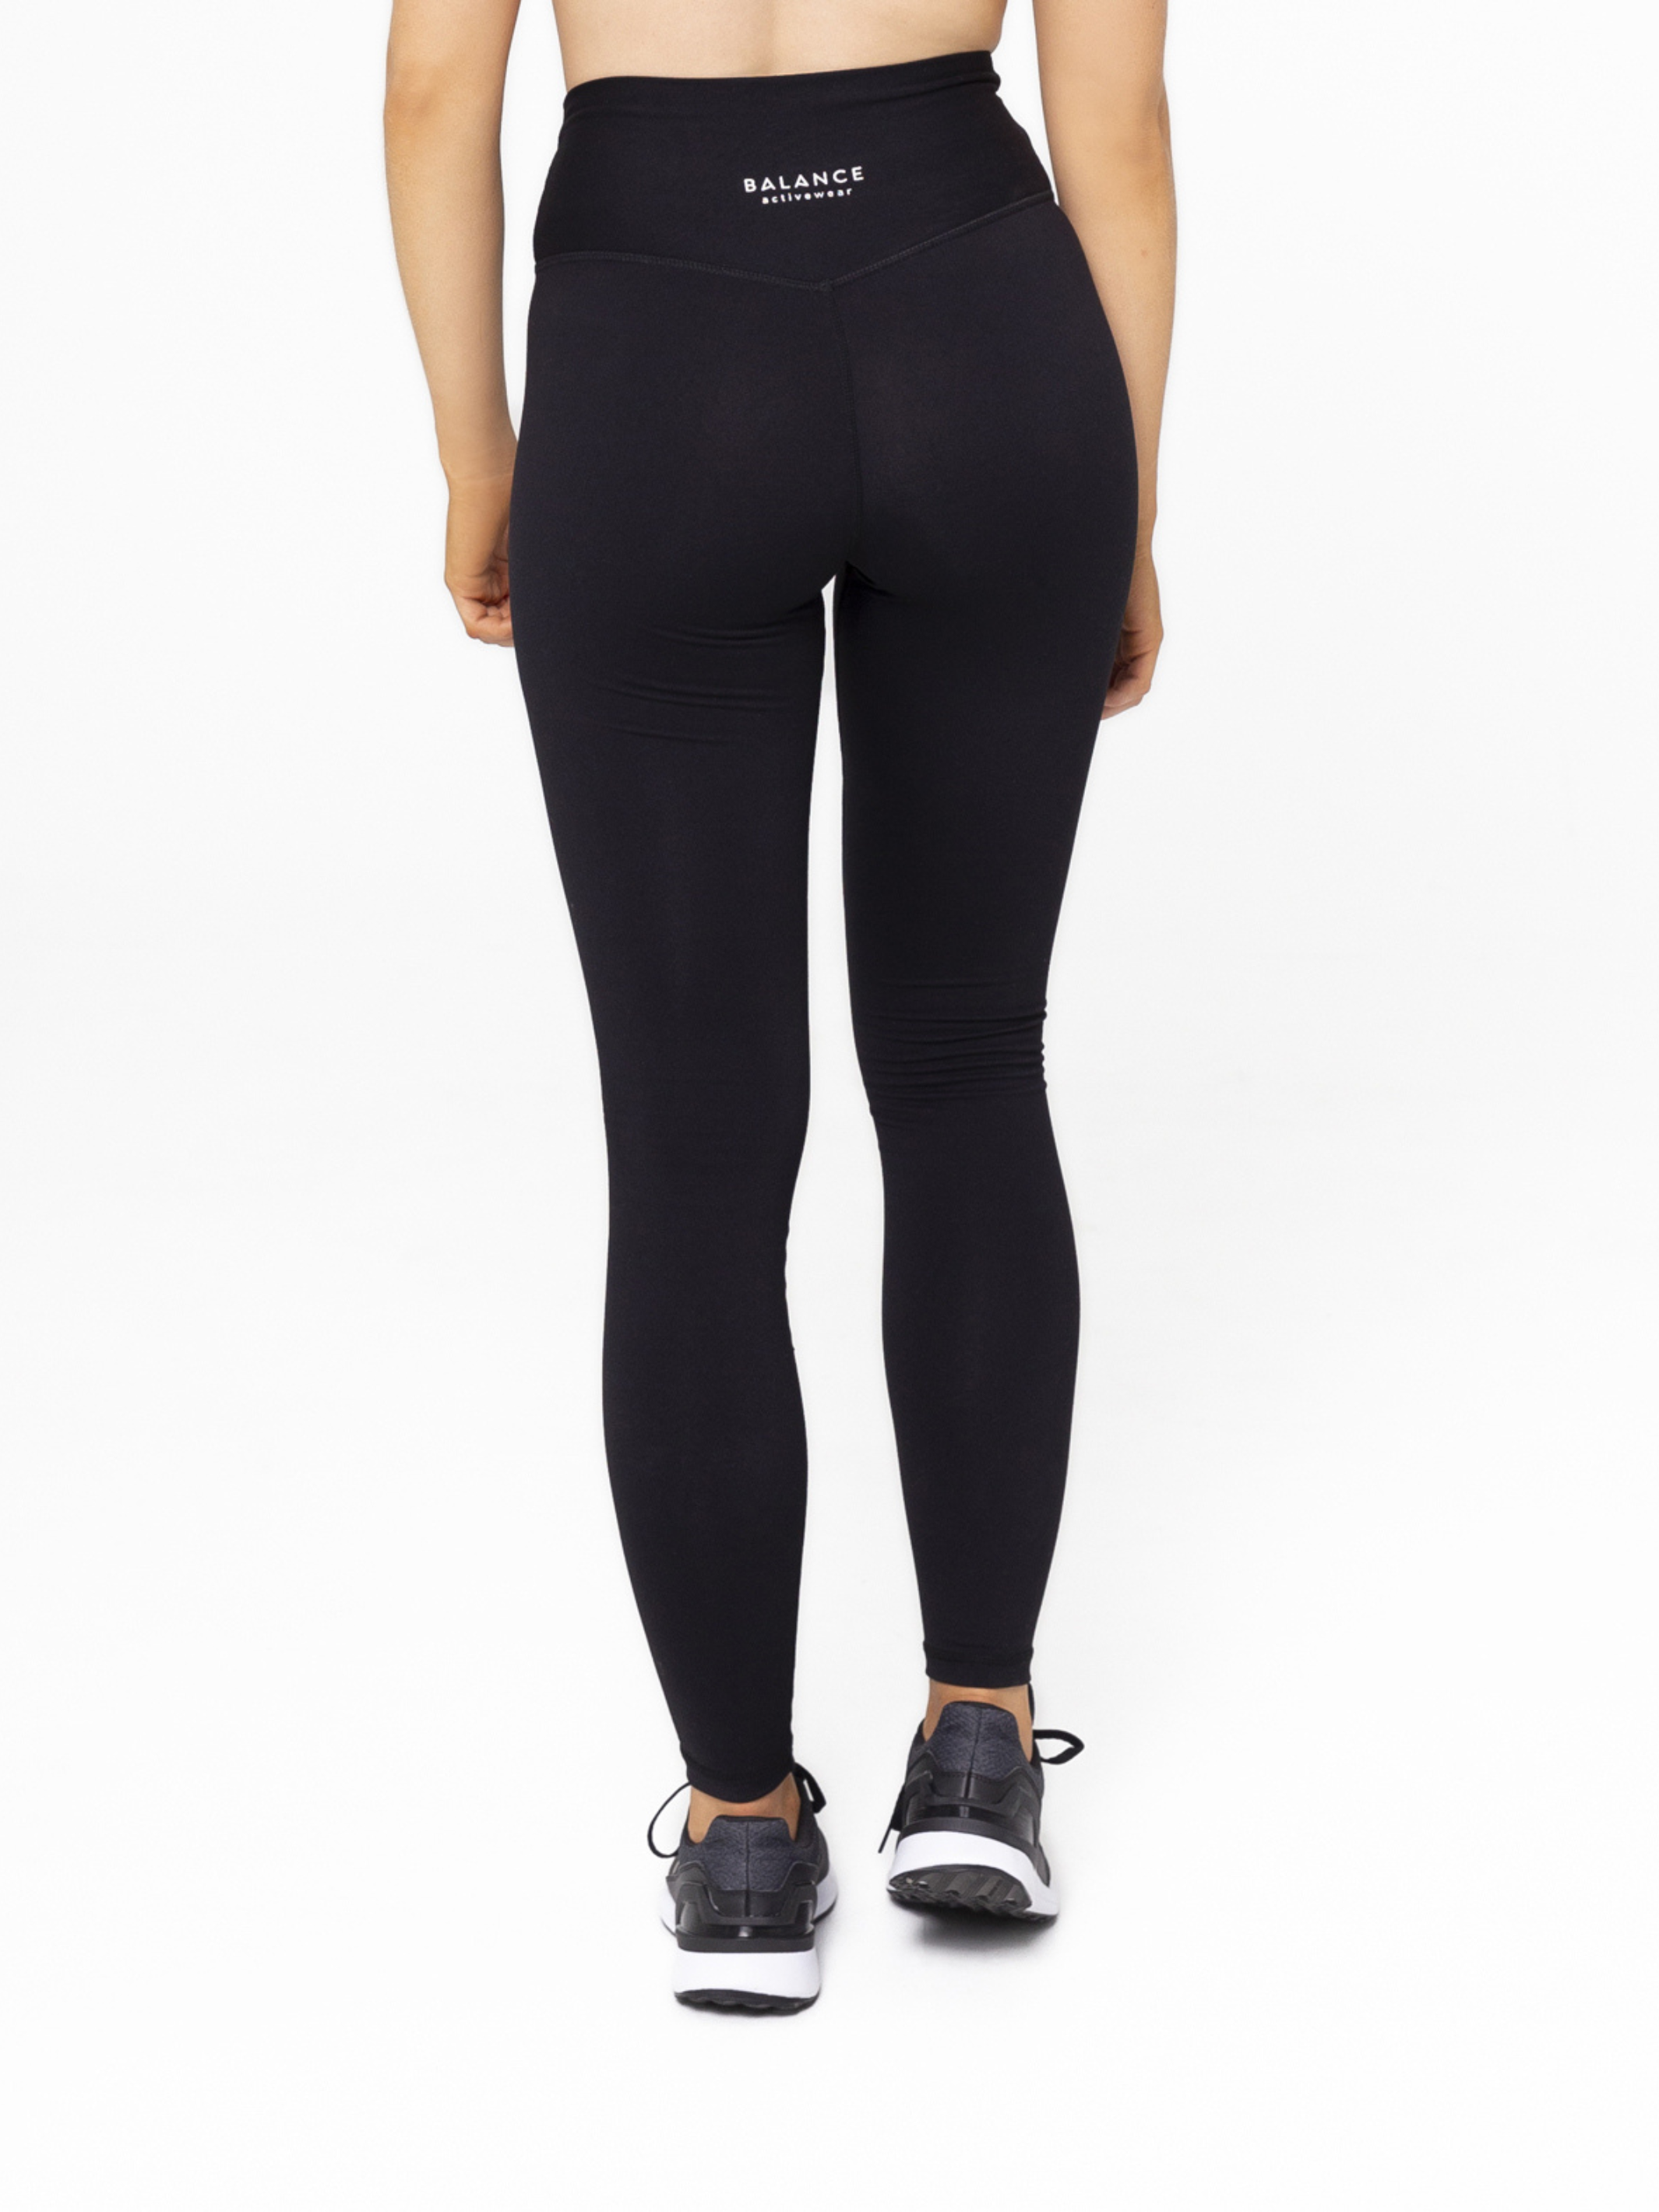 UP TO 60% OFF – BALANCE ACTIVEWEAR